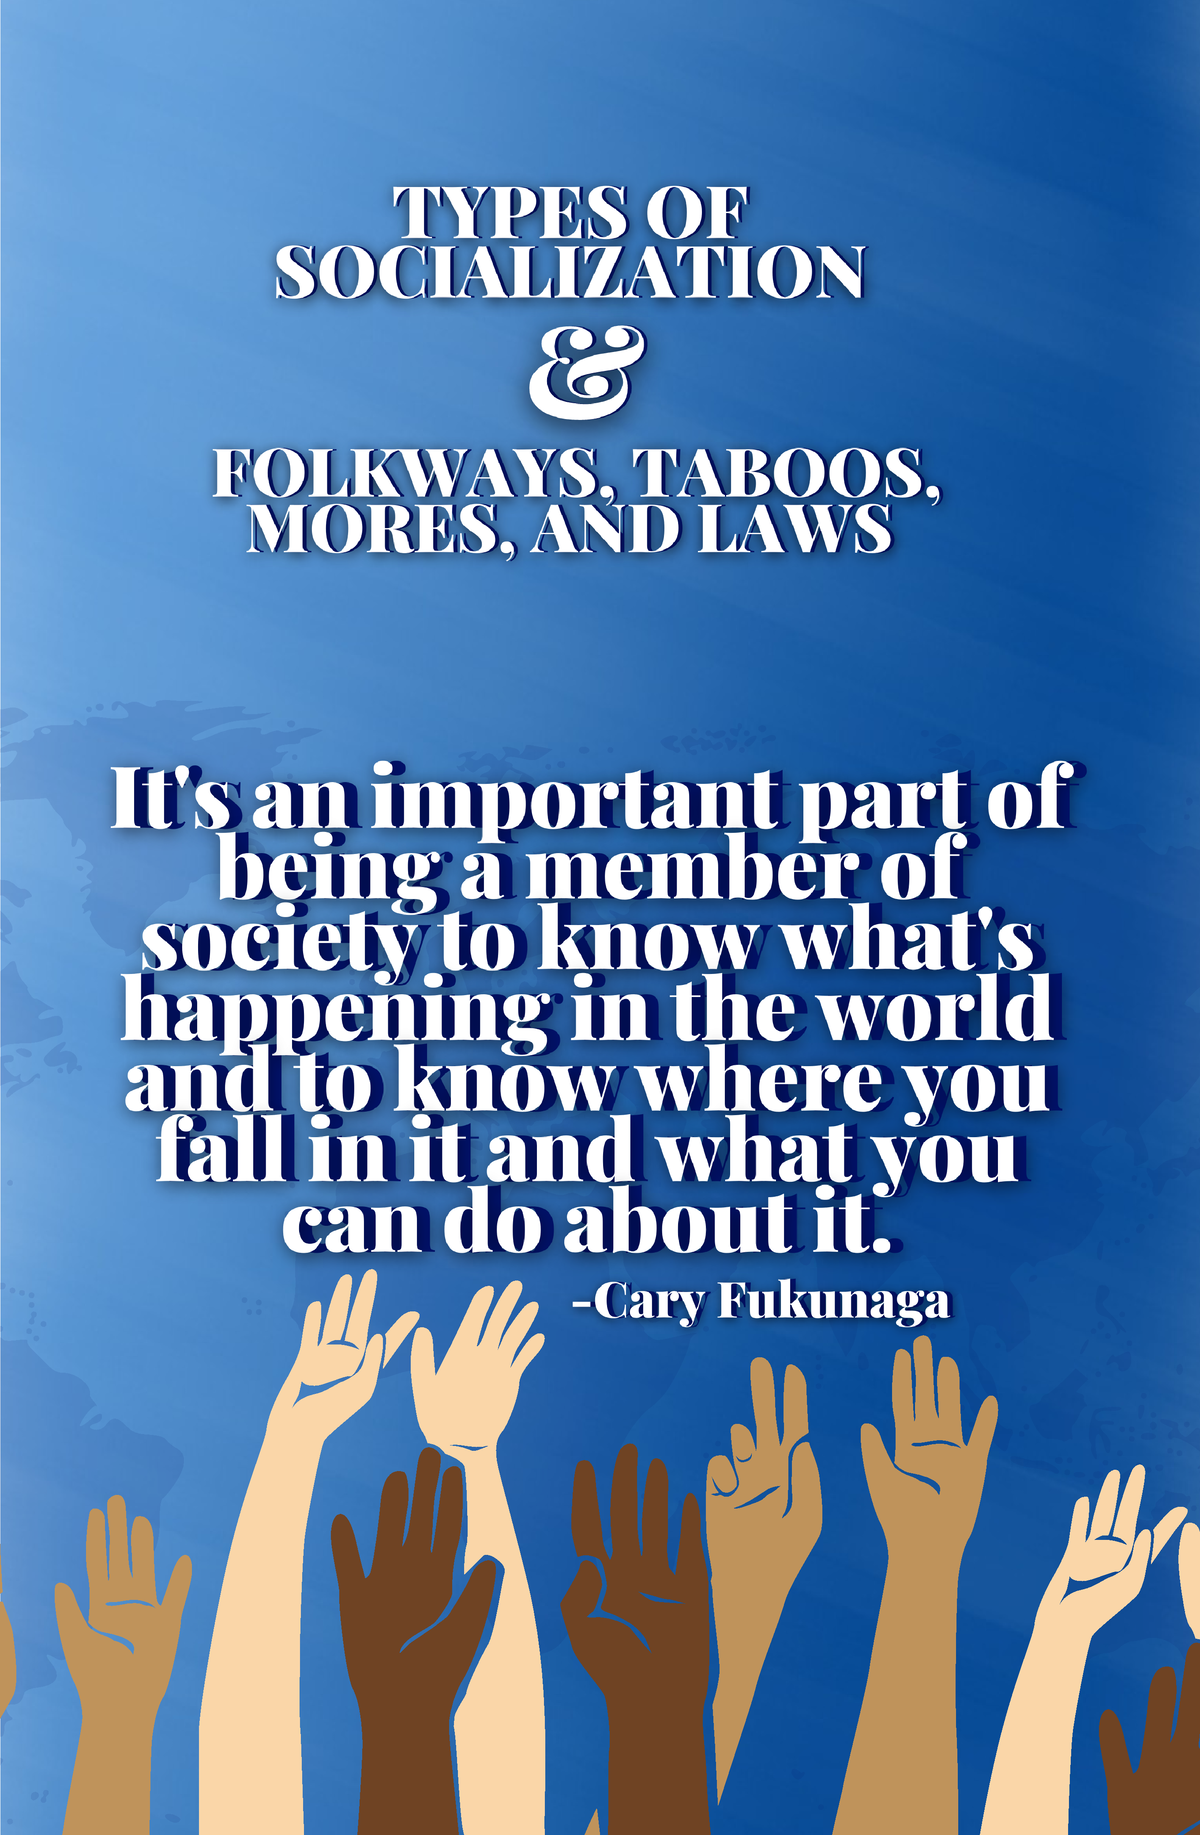 Socialization And Folkways Taboos Mores And Laws Moresmores Taboos Taboos Laws Laws